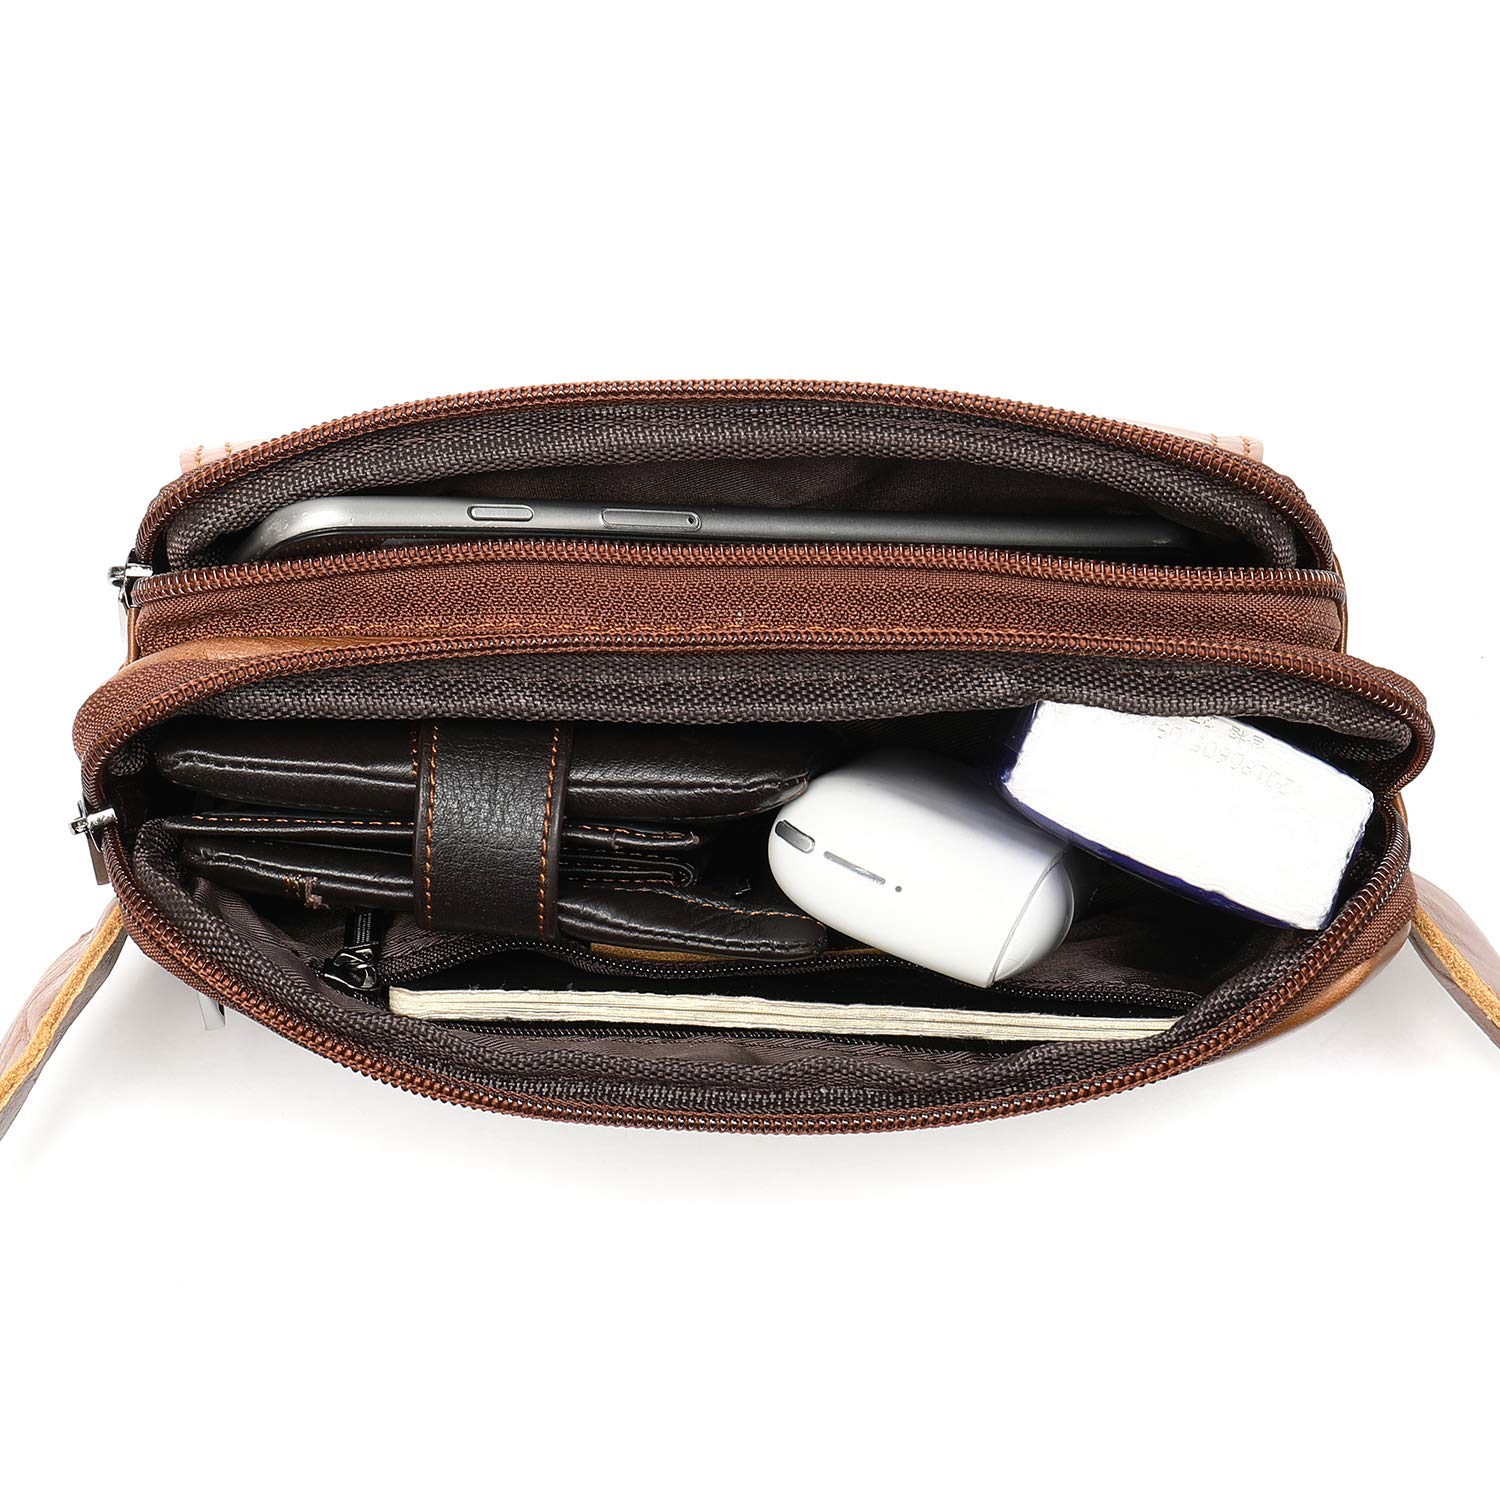 Fanny Pack for Men and Women, Leather Sling Waist Bag for Hiking Running Travel - Durable Cowhide Leather